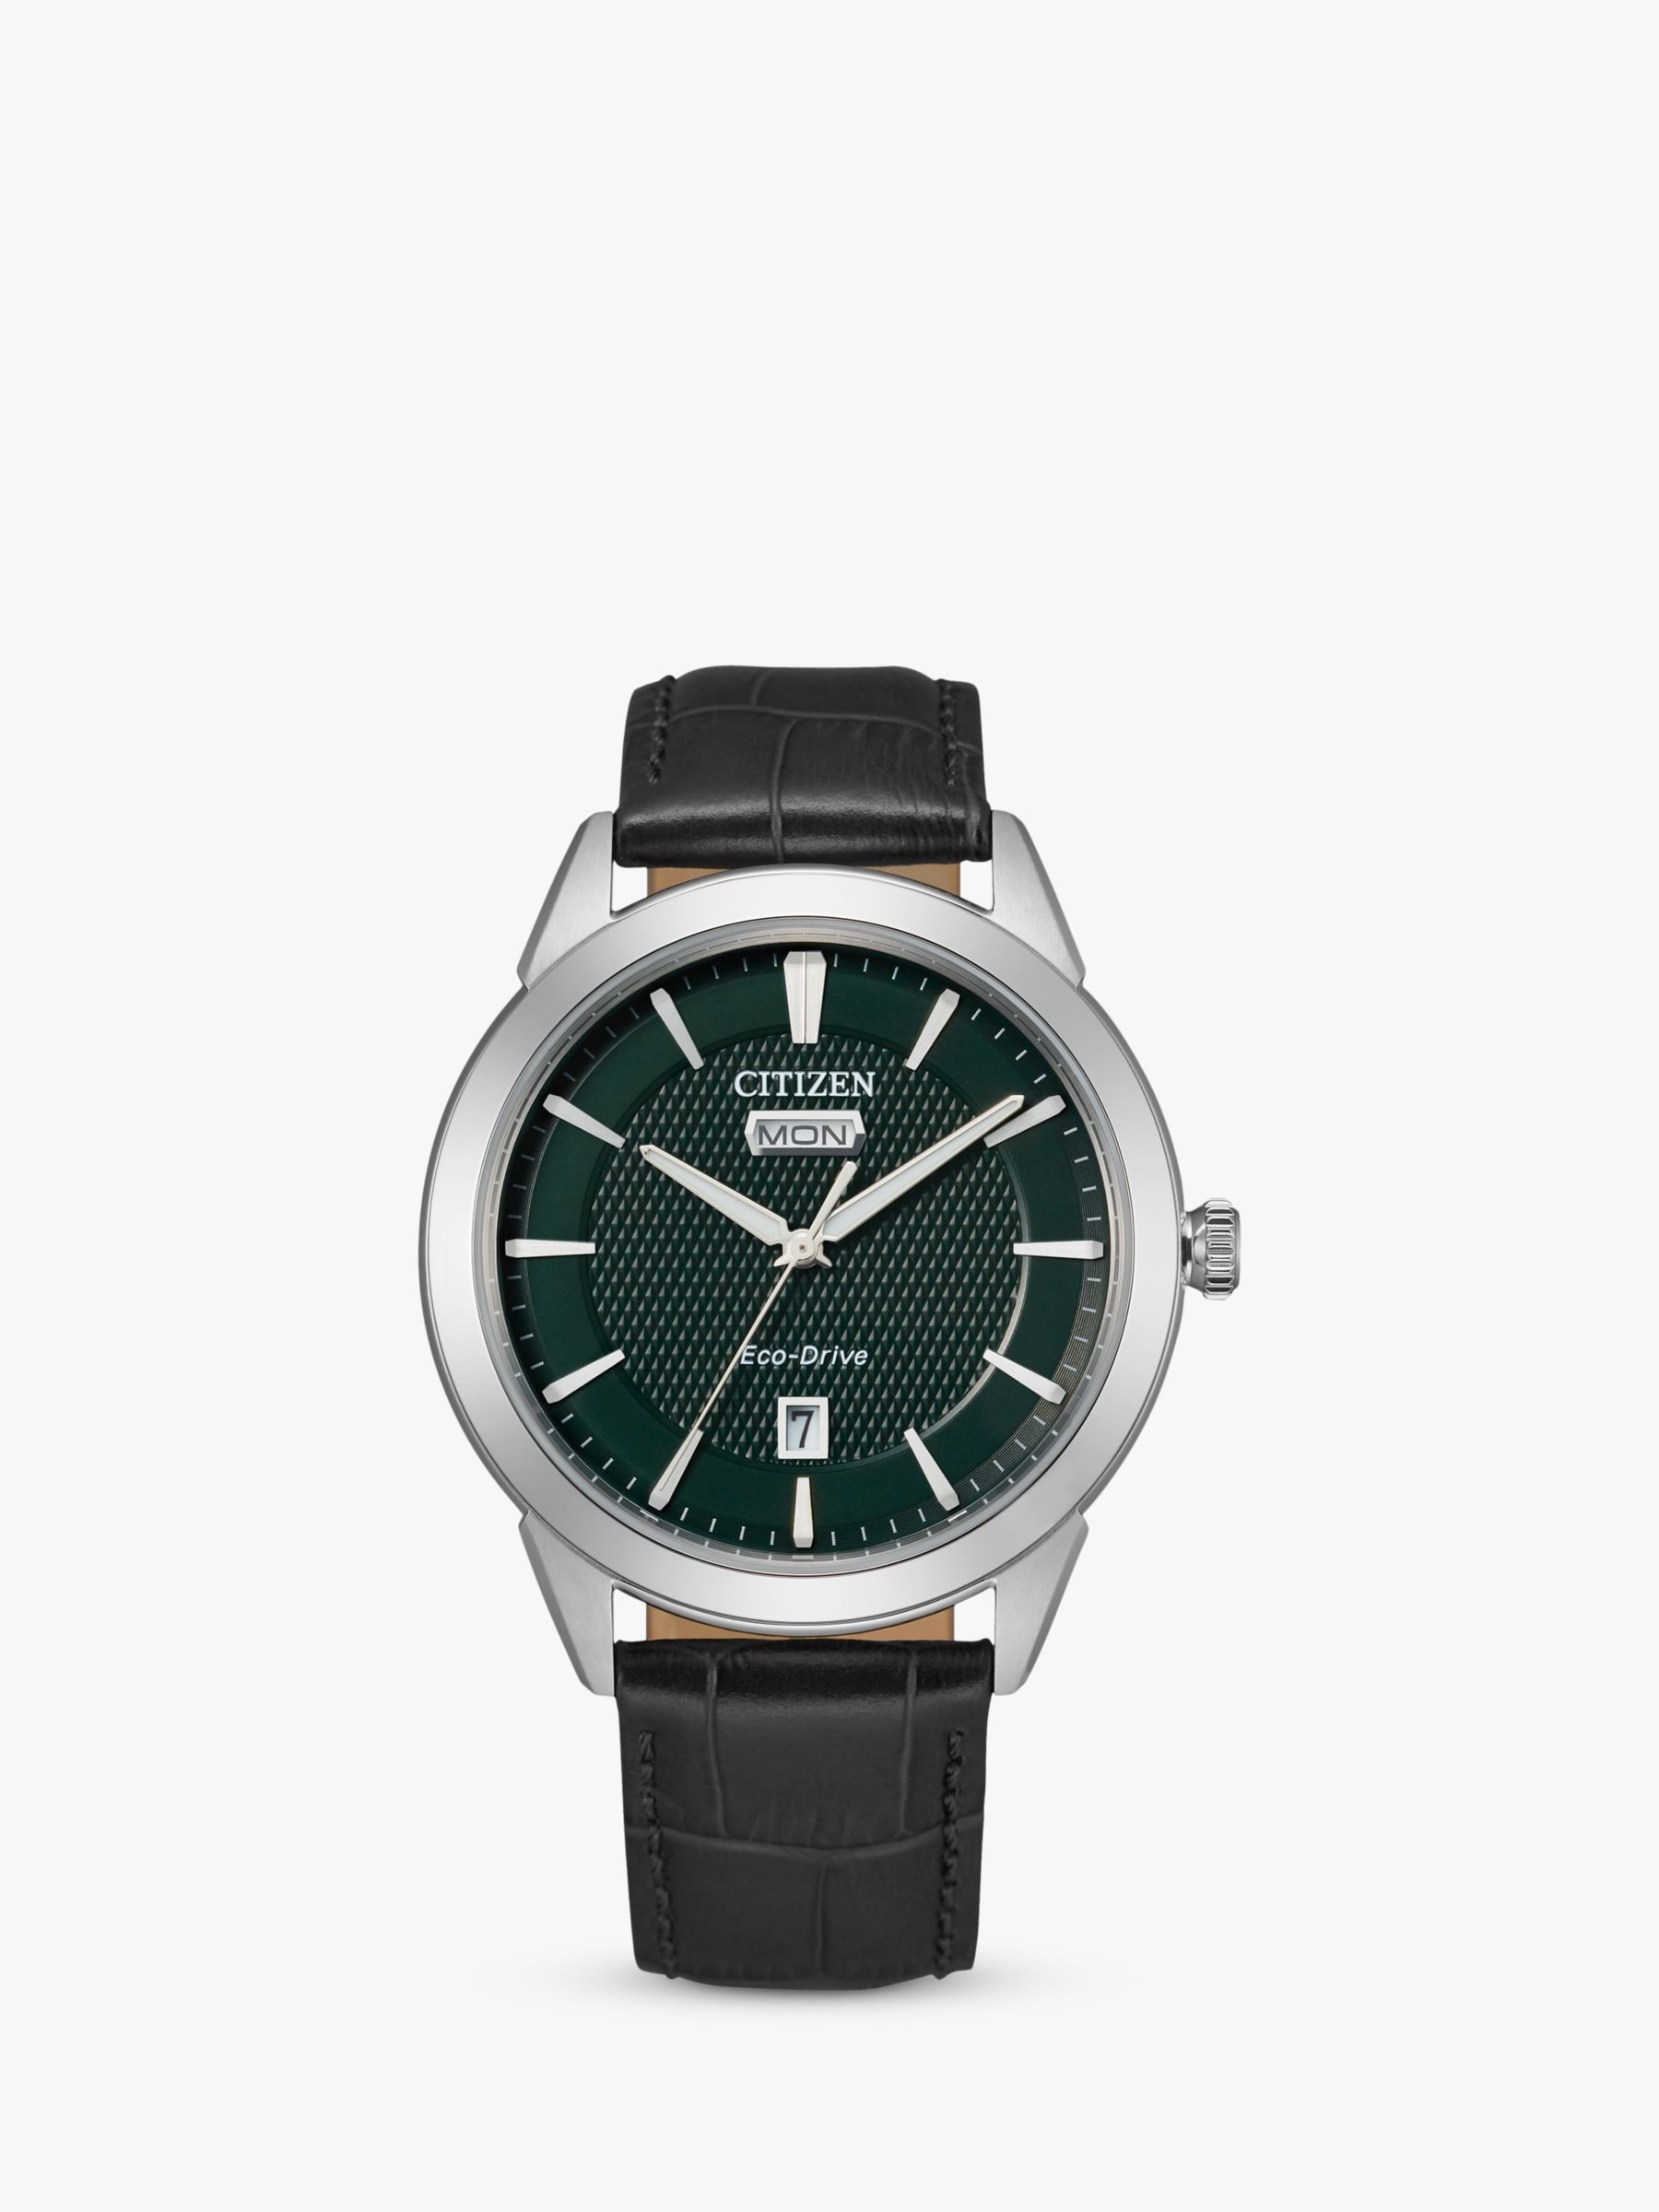 Citizen AW0090-02X Men's Dress Classic Eco-Drive Date Leather Strap Watch,  Black/Green at John Lewis & Partners